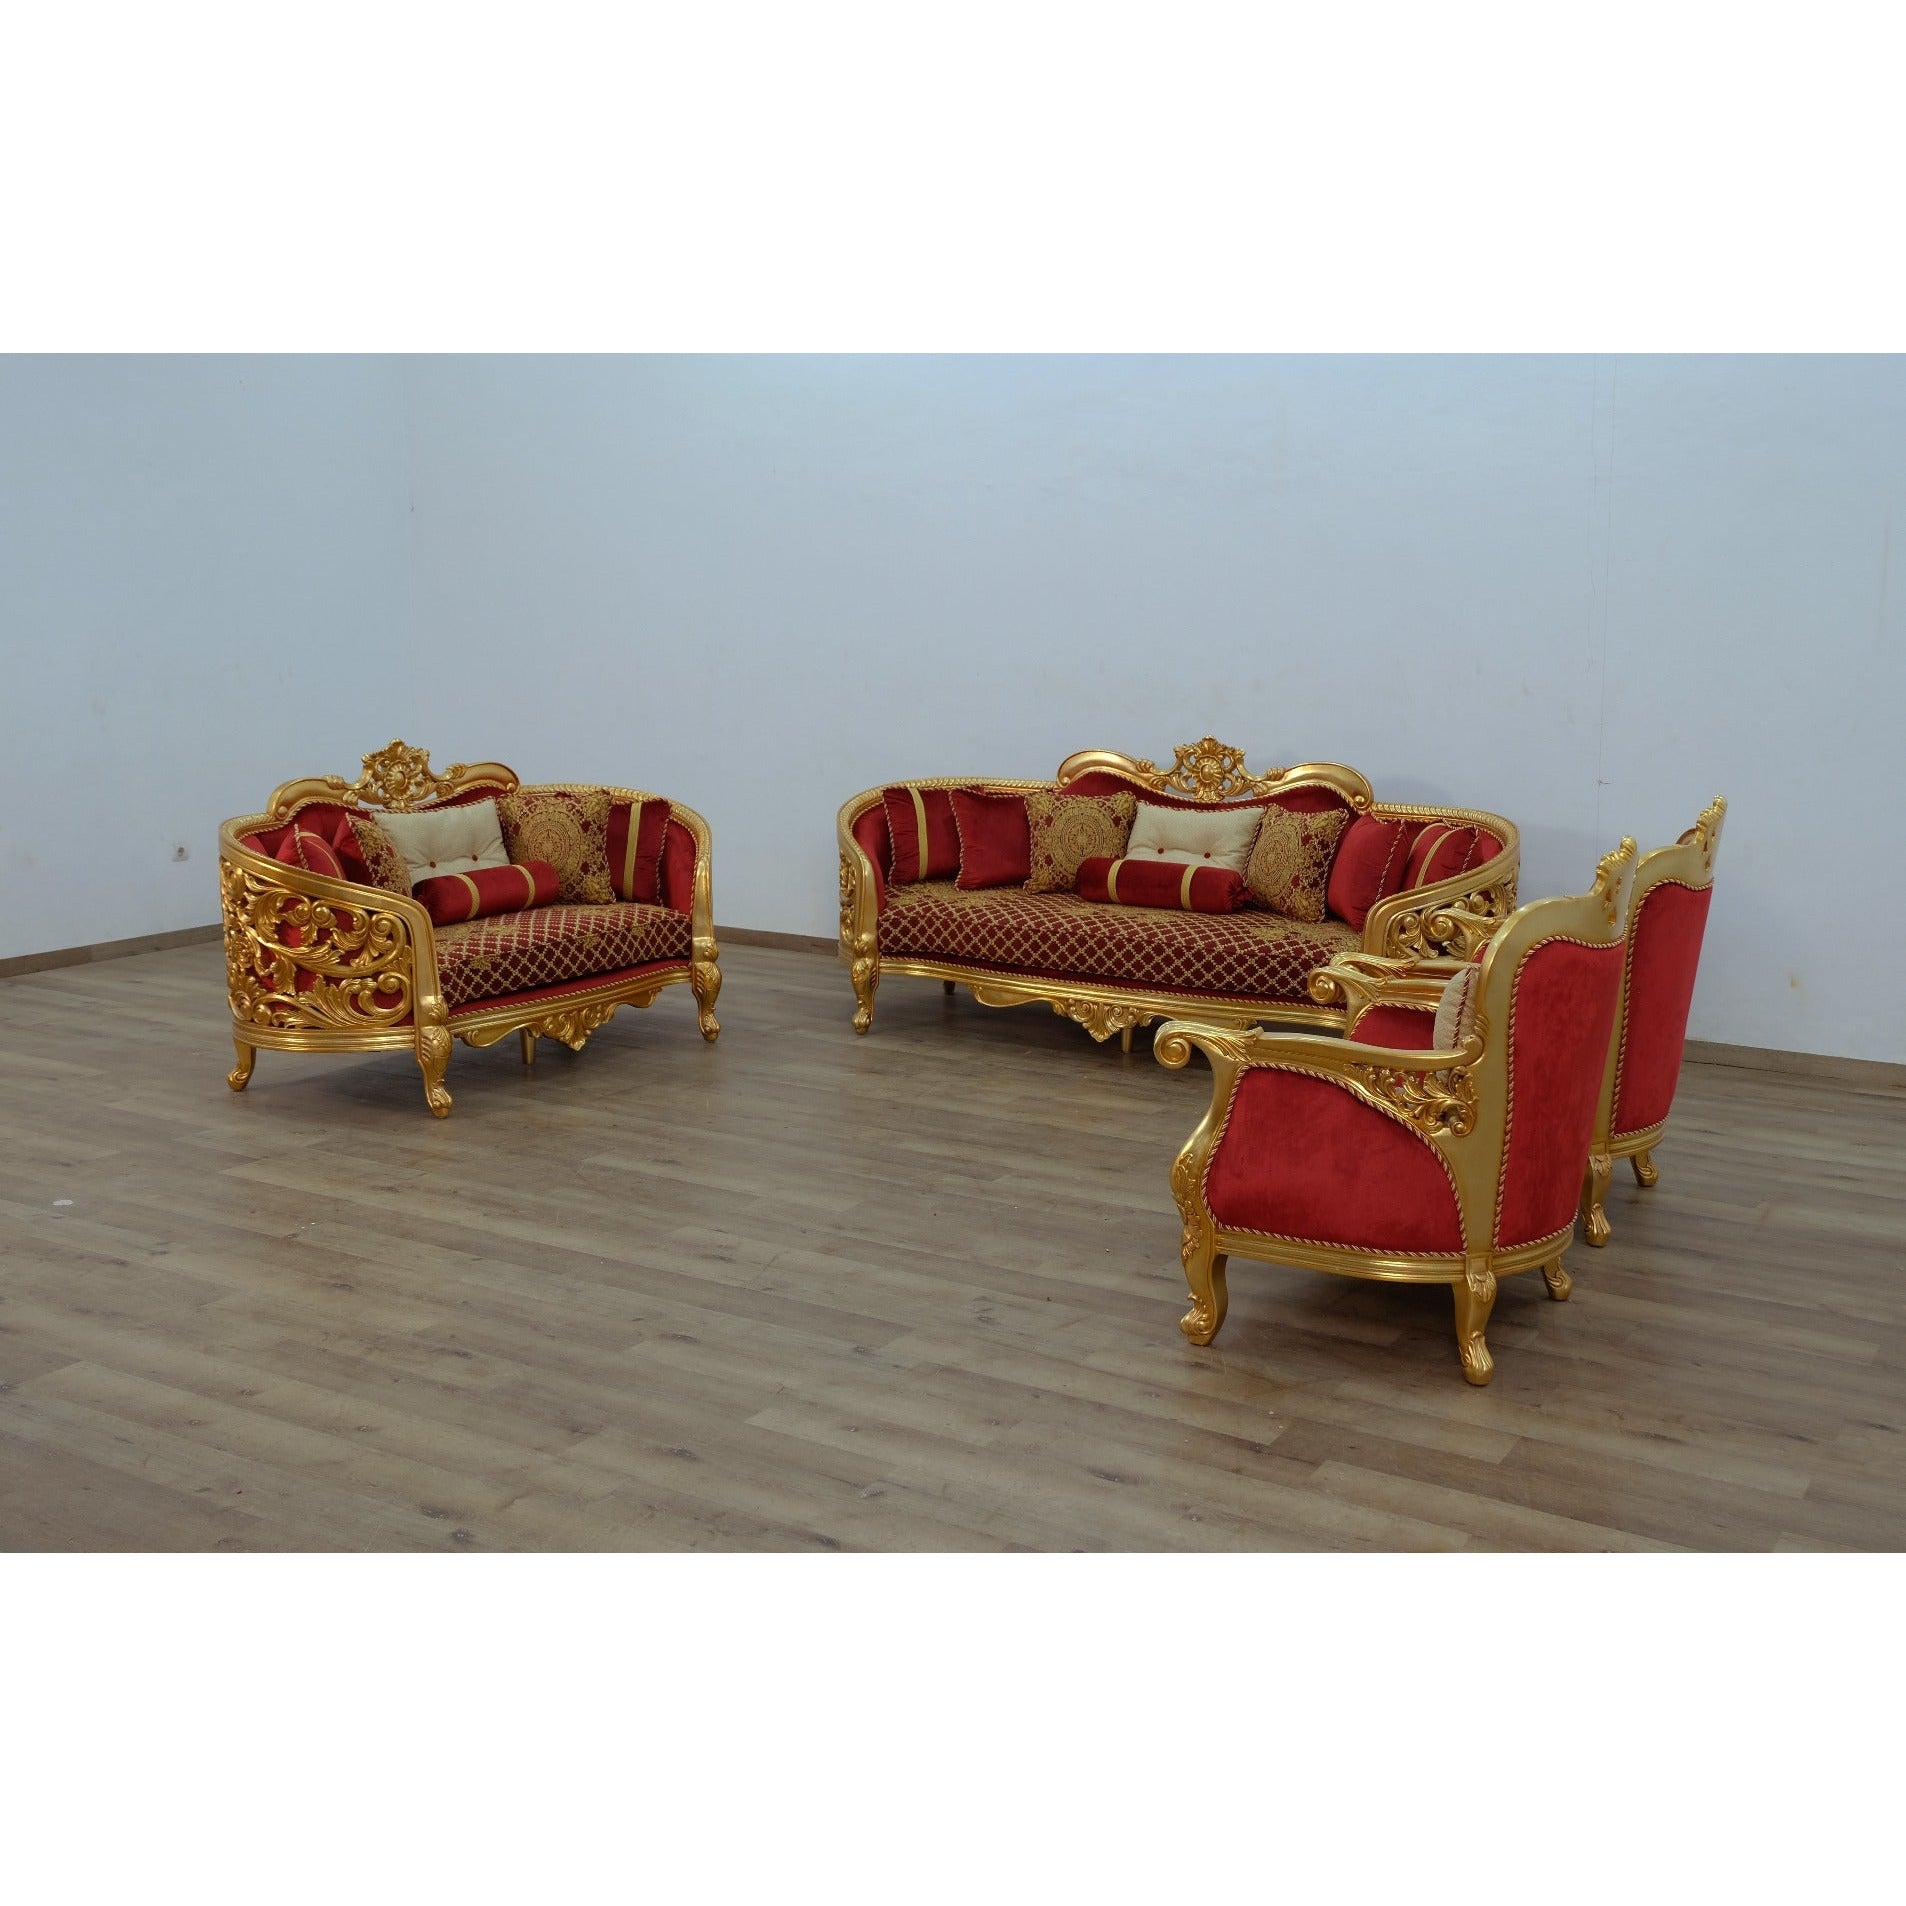 European Furniture - Bellagio II 4 Piece Living Room Set in Red-Gold - 30013-4SET - New Star Living